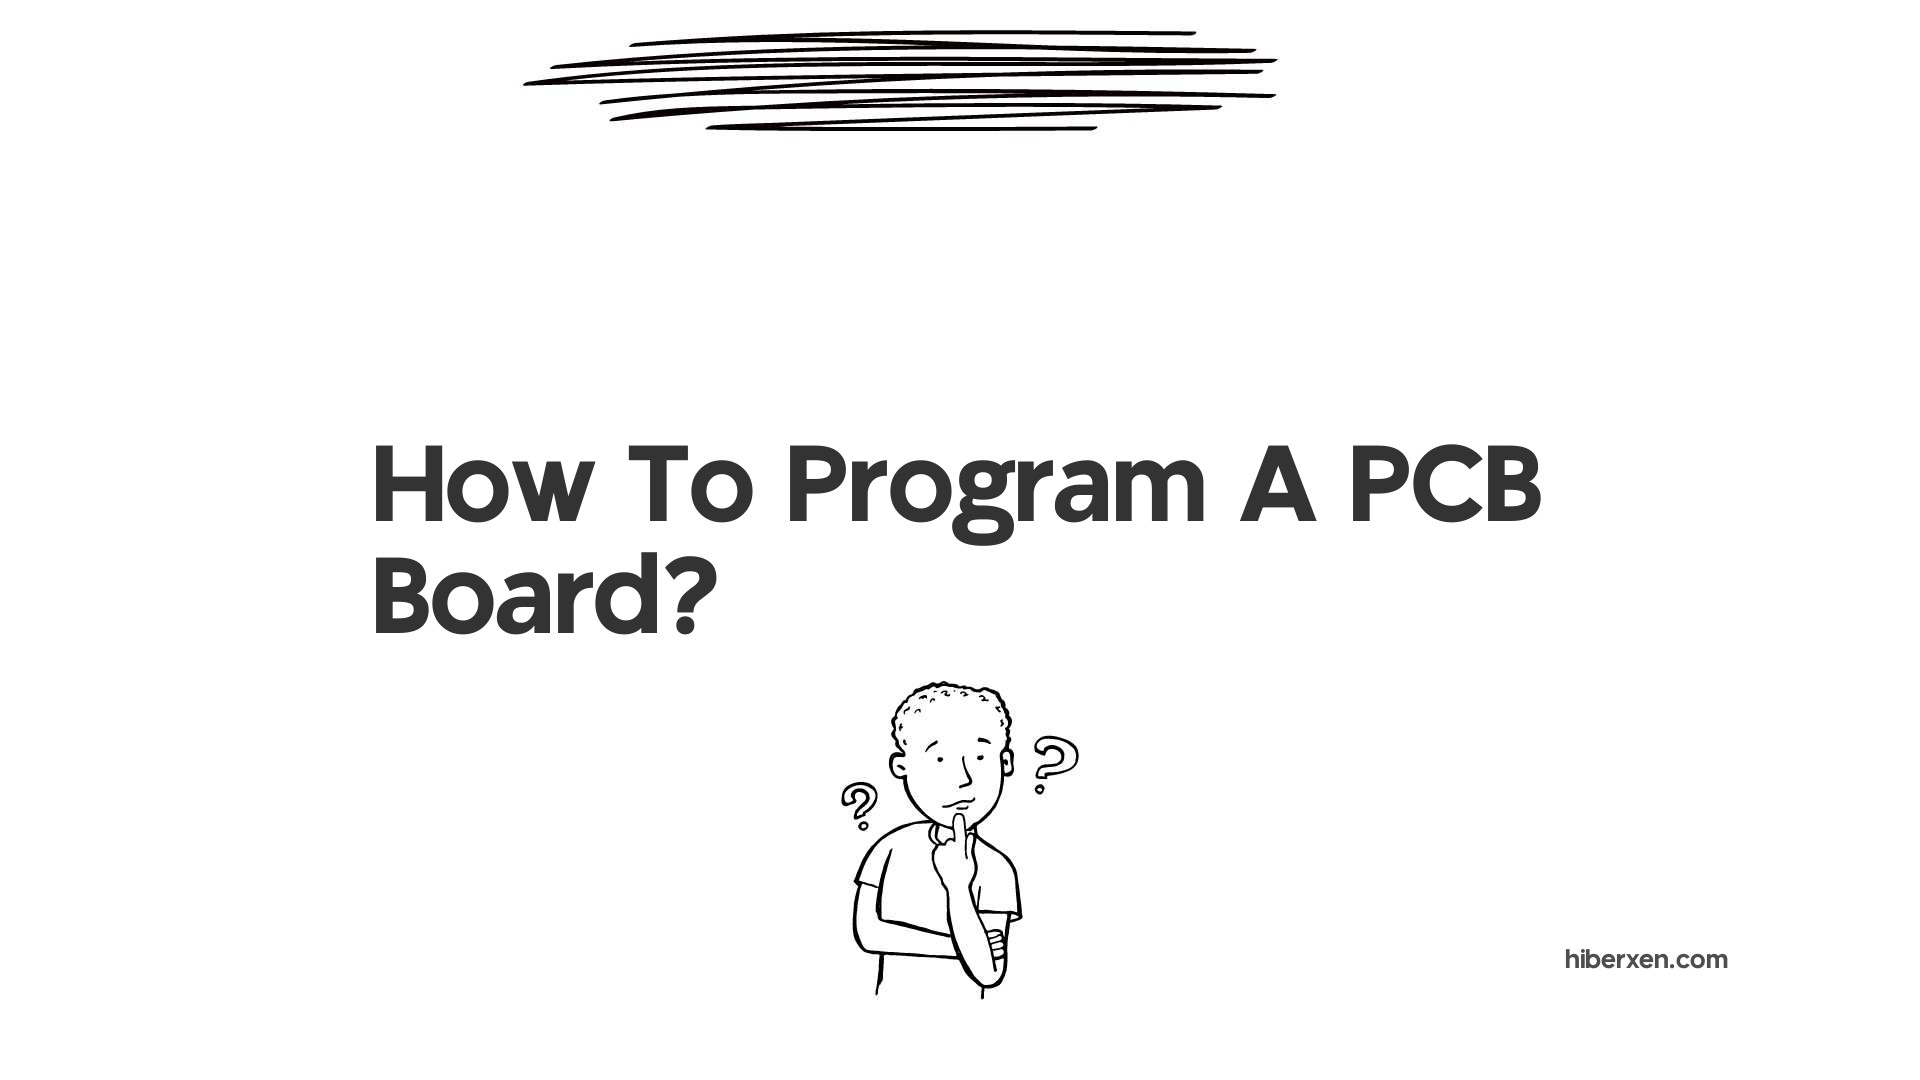 How To Program A PCB Board?